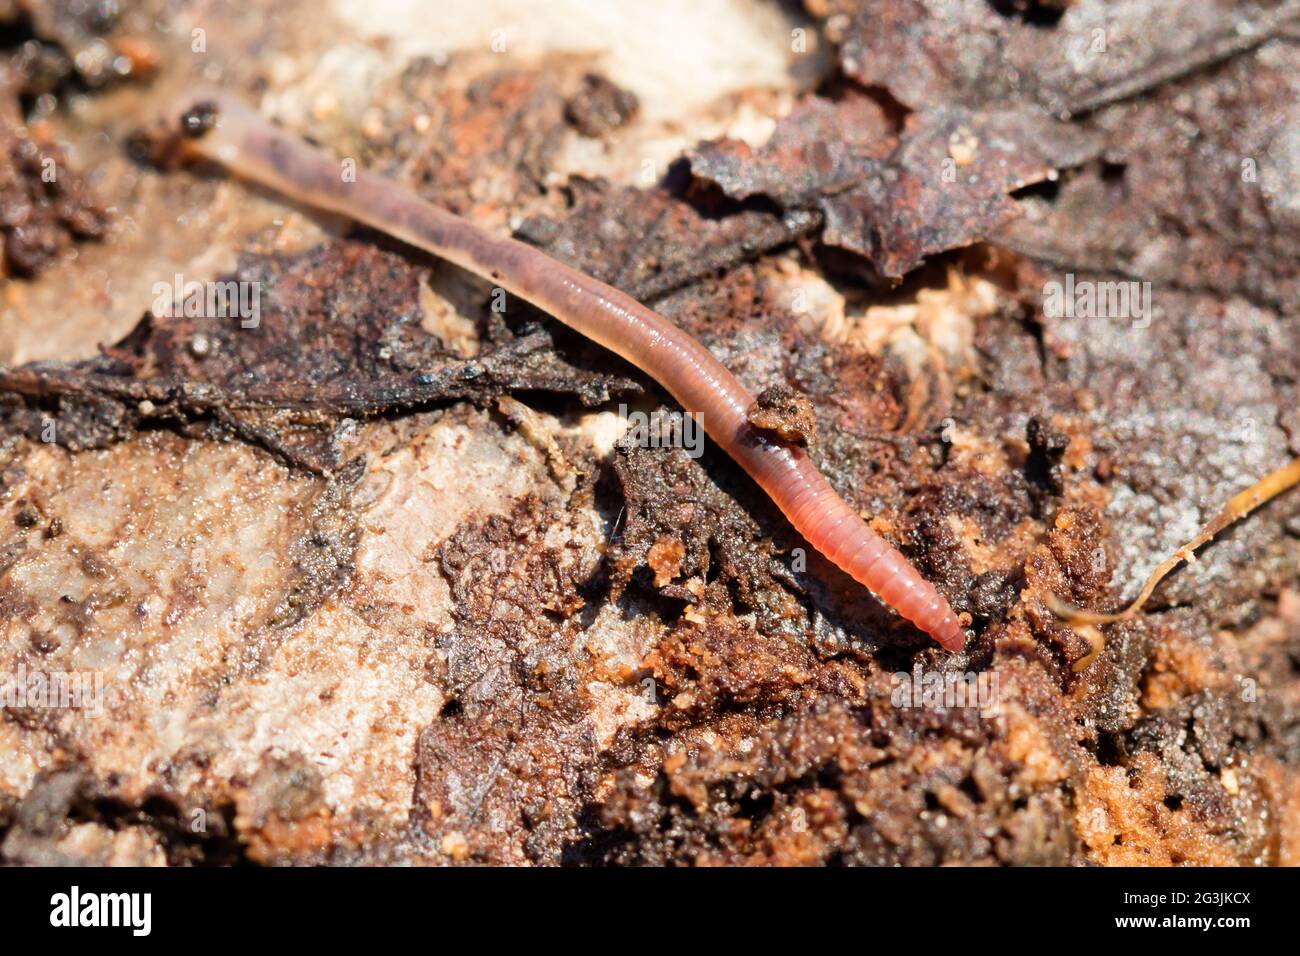 Earthworms on a piece of wood, selective focus Stock Photo